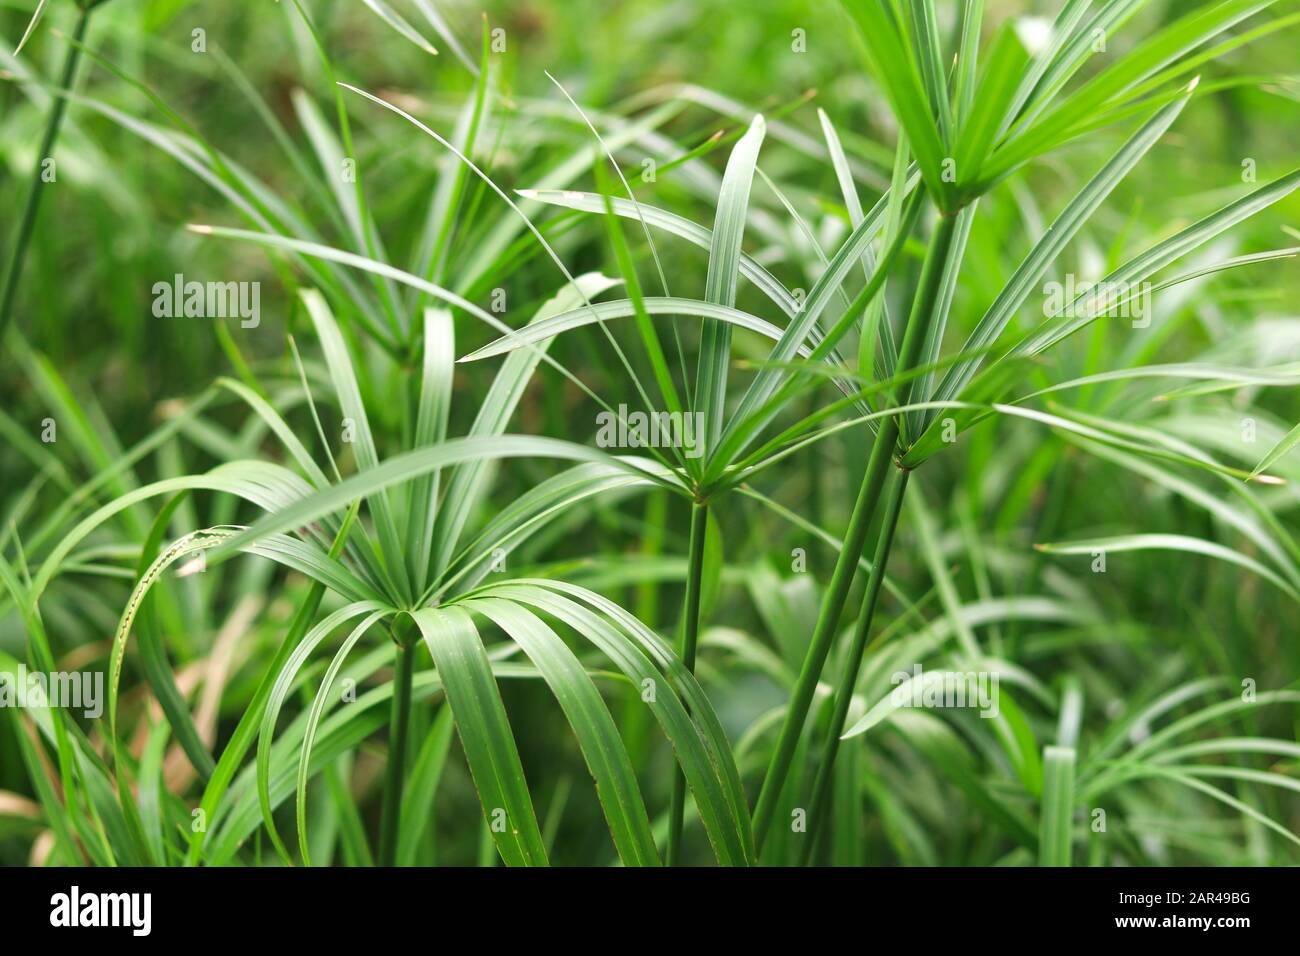 Group of papyrus growing up near the water source. Papyrus with straight stems and long slender leaves. Stock Photo